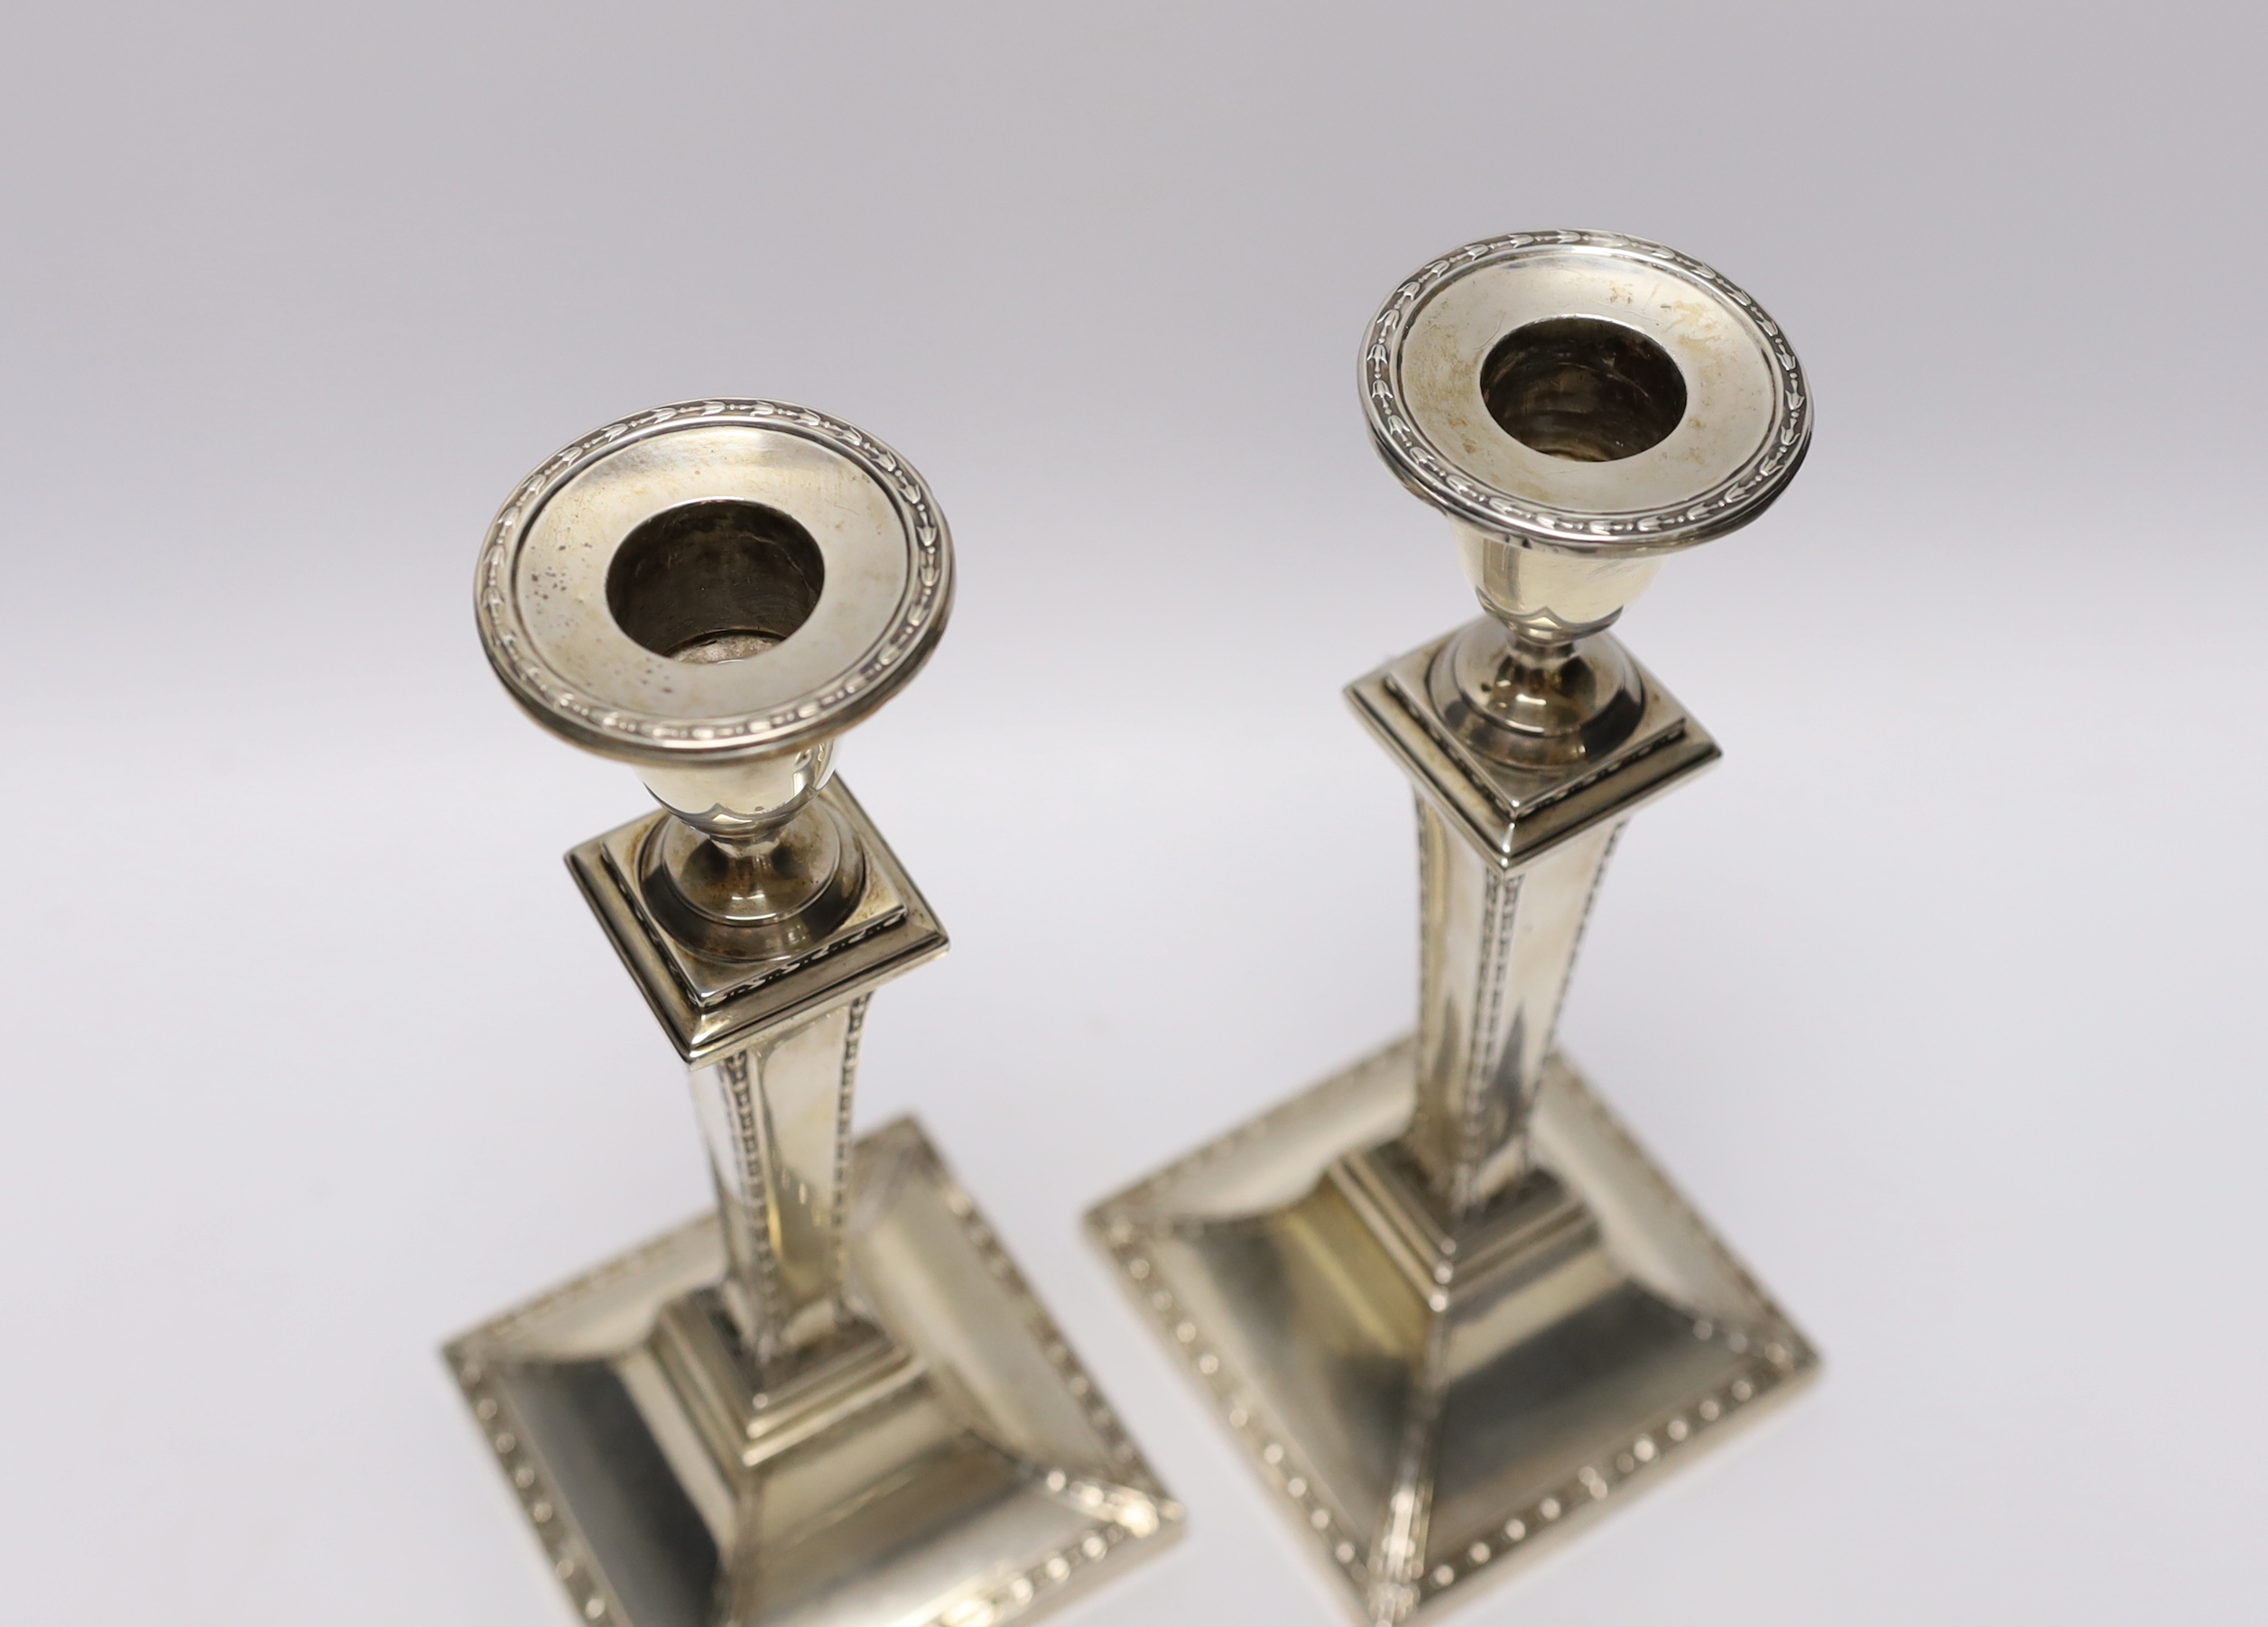 A pair of Edwardian silver candlesticks, with tapering square stems, Stewart Dawson & Co Ltd, London, 1909, height 22.3cm, weighted.